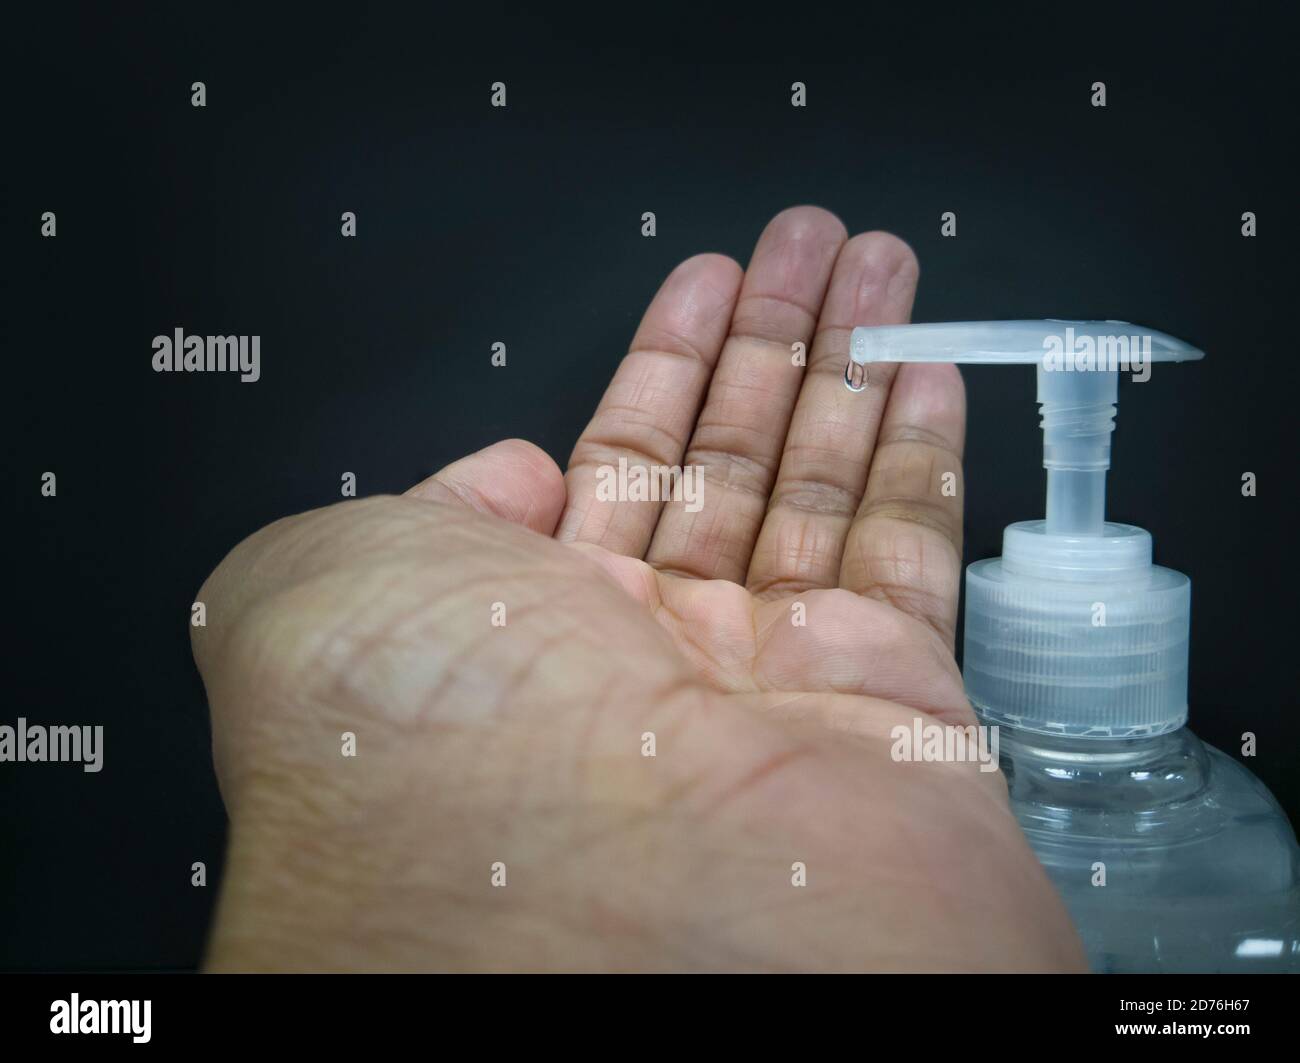 Washing hand with Antibacterial hand sanitizer, disinfection gel. Selective Focus Stock Photo